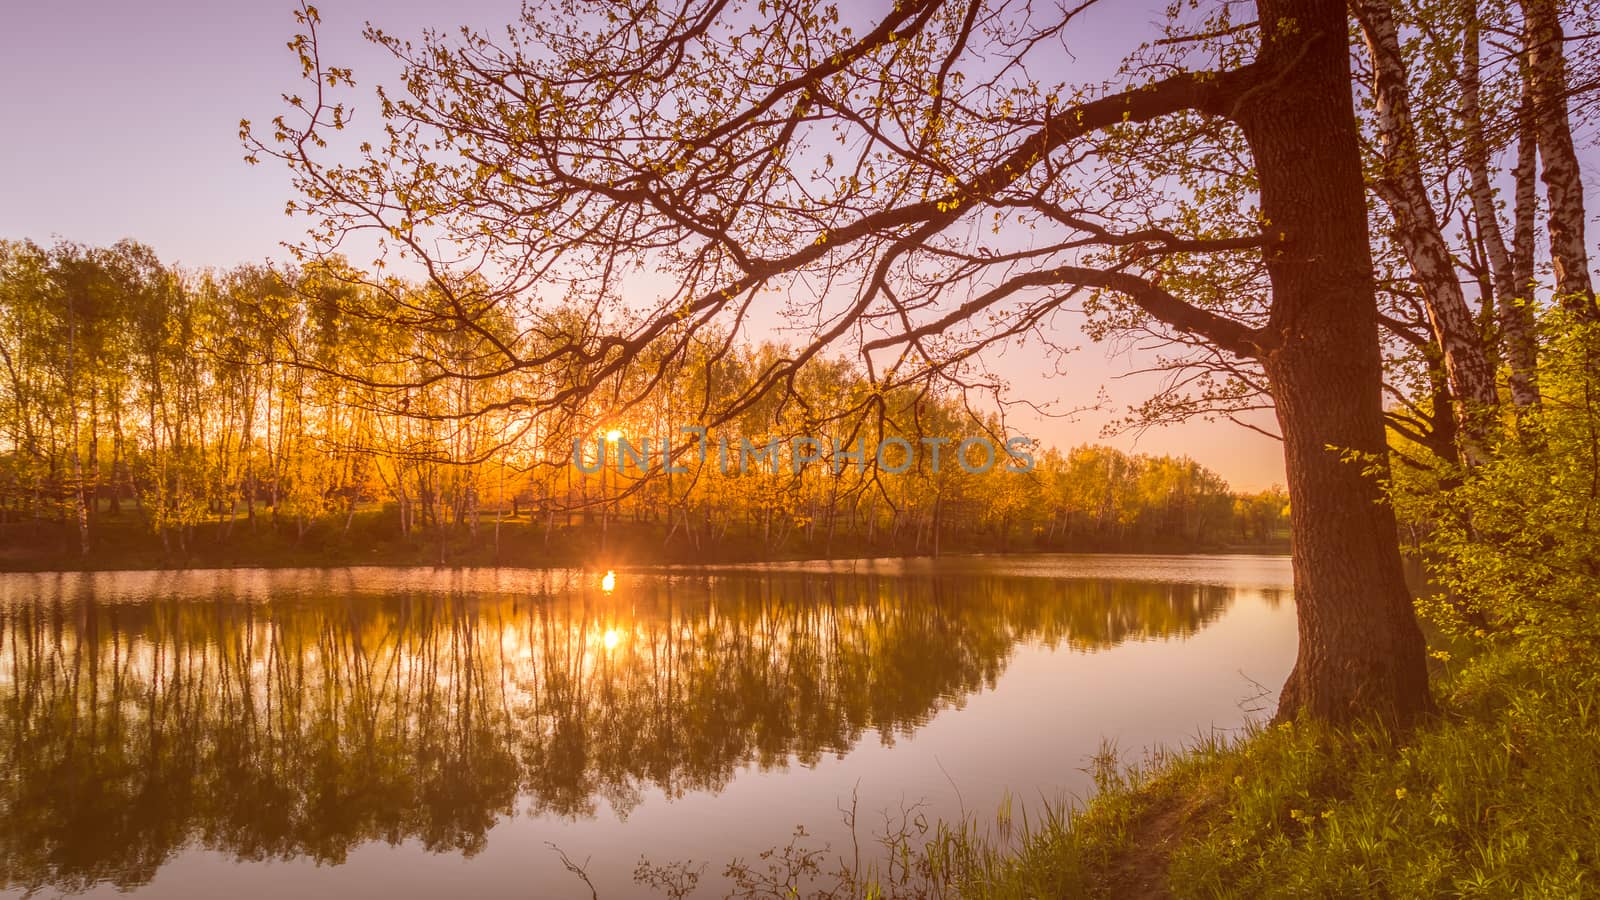 Sunrise or sunset on a pond with young green reeds, birches on the neighboring shore, reflected in water, fog and the sun.